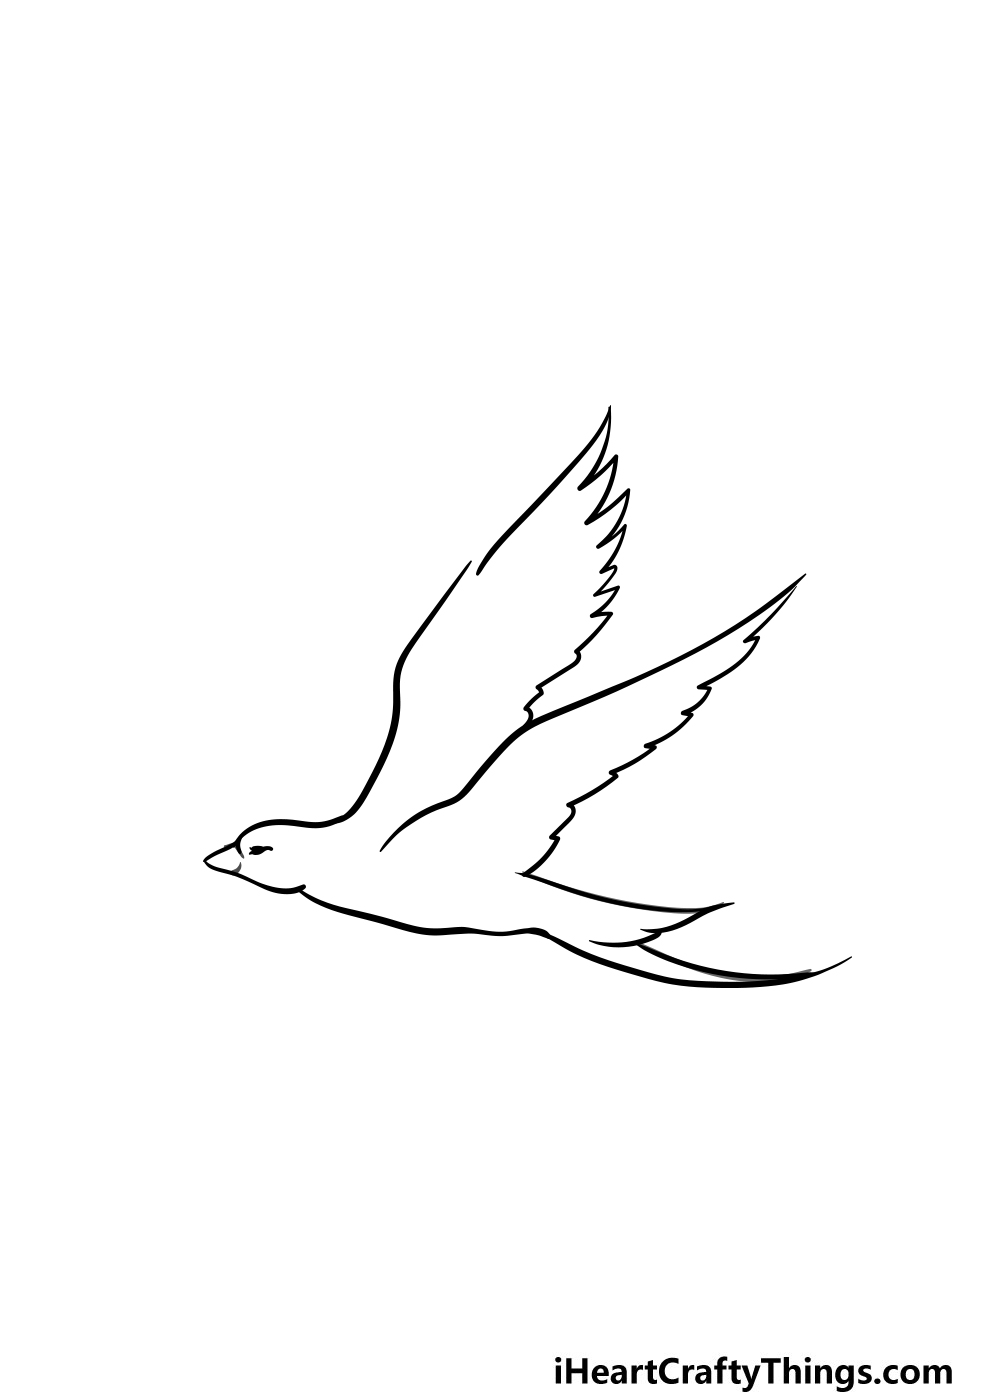 drawing a flying bird step 3